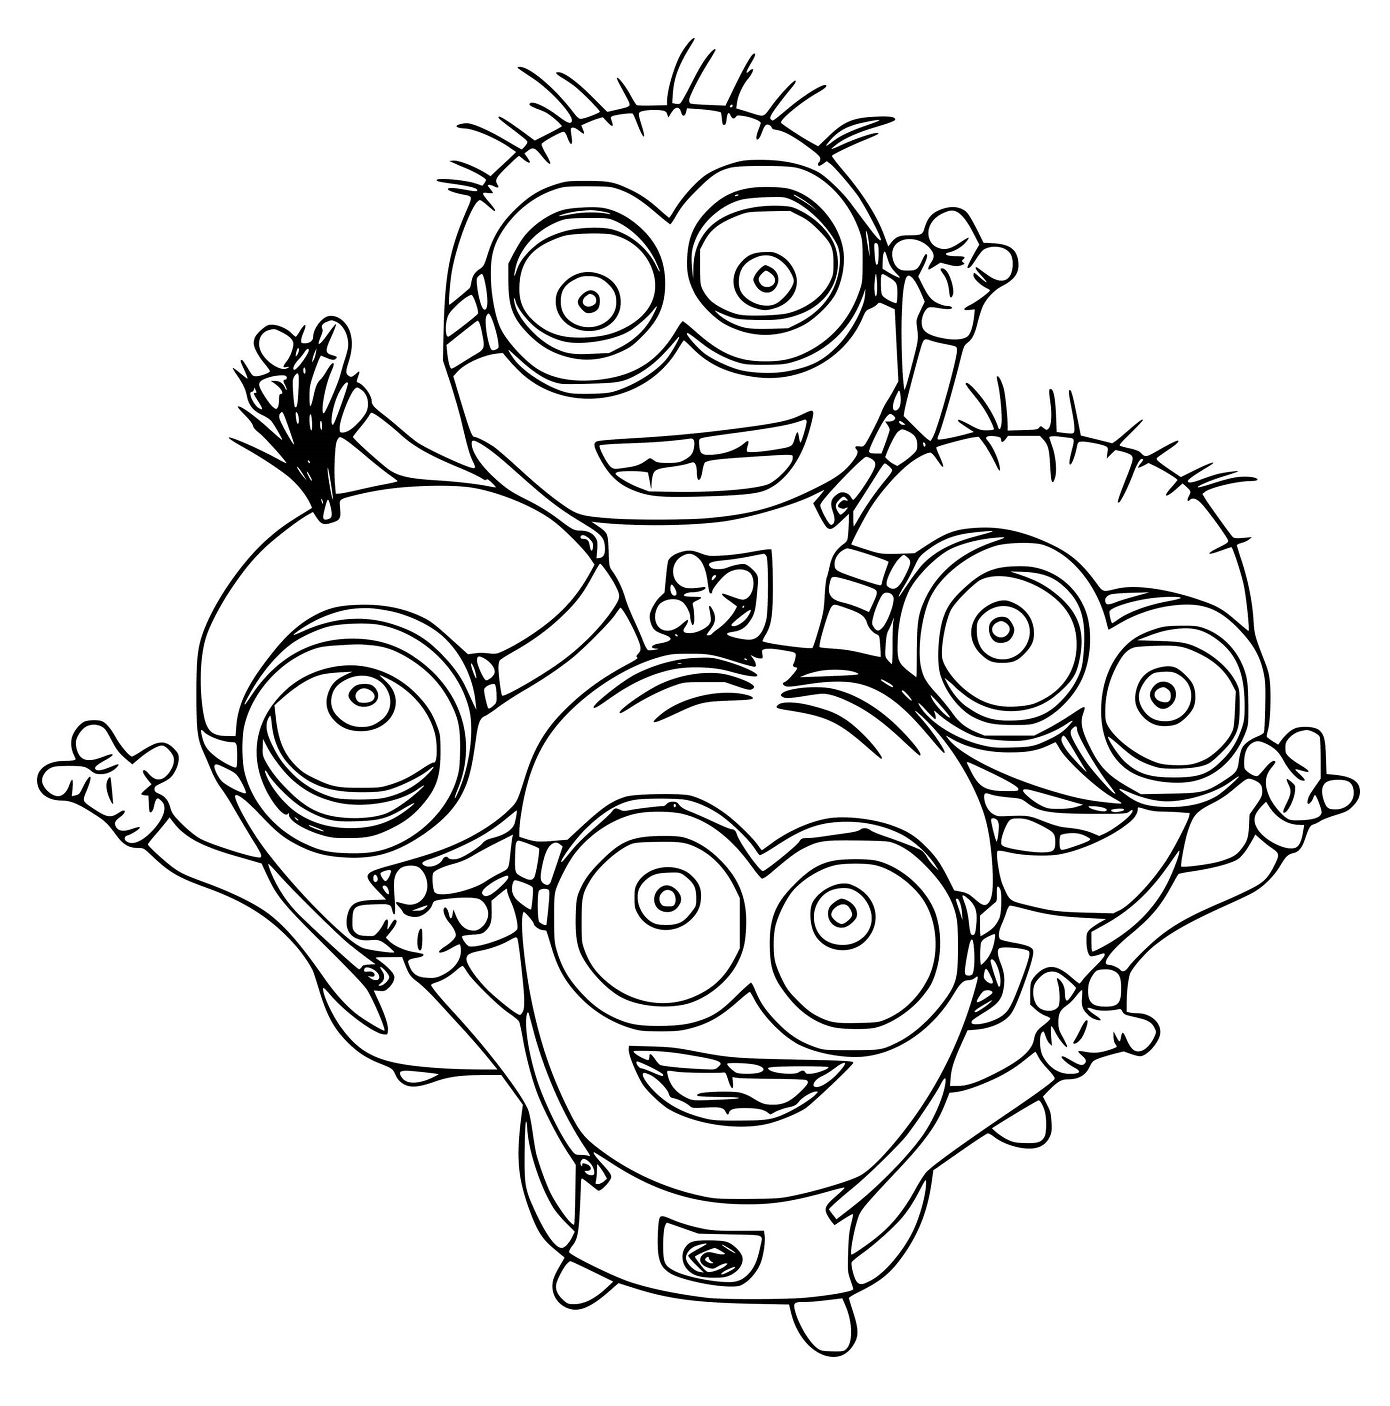 Printable Minions going crazy Coloring Page for kids.